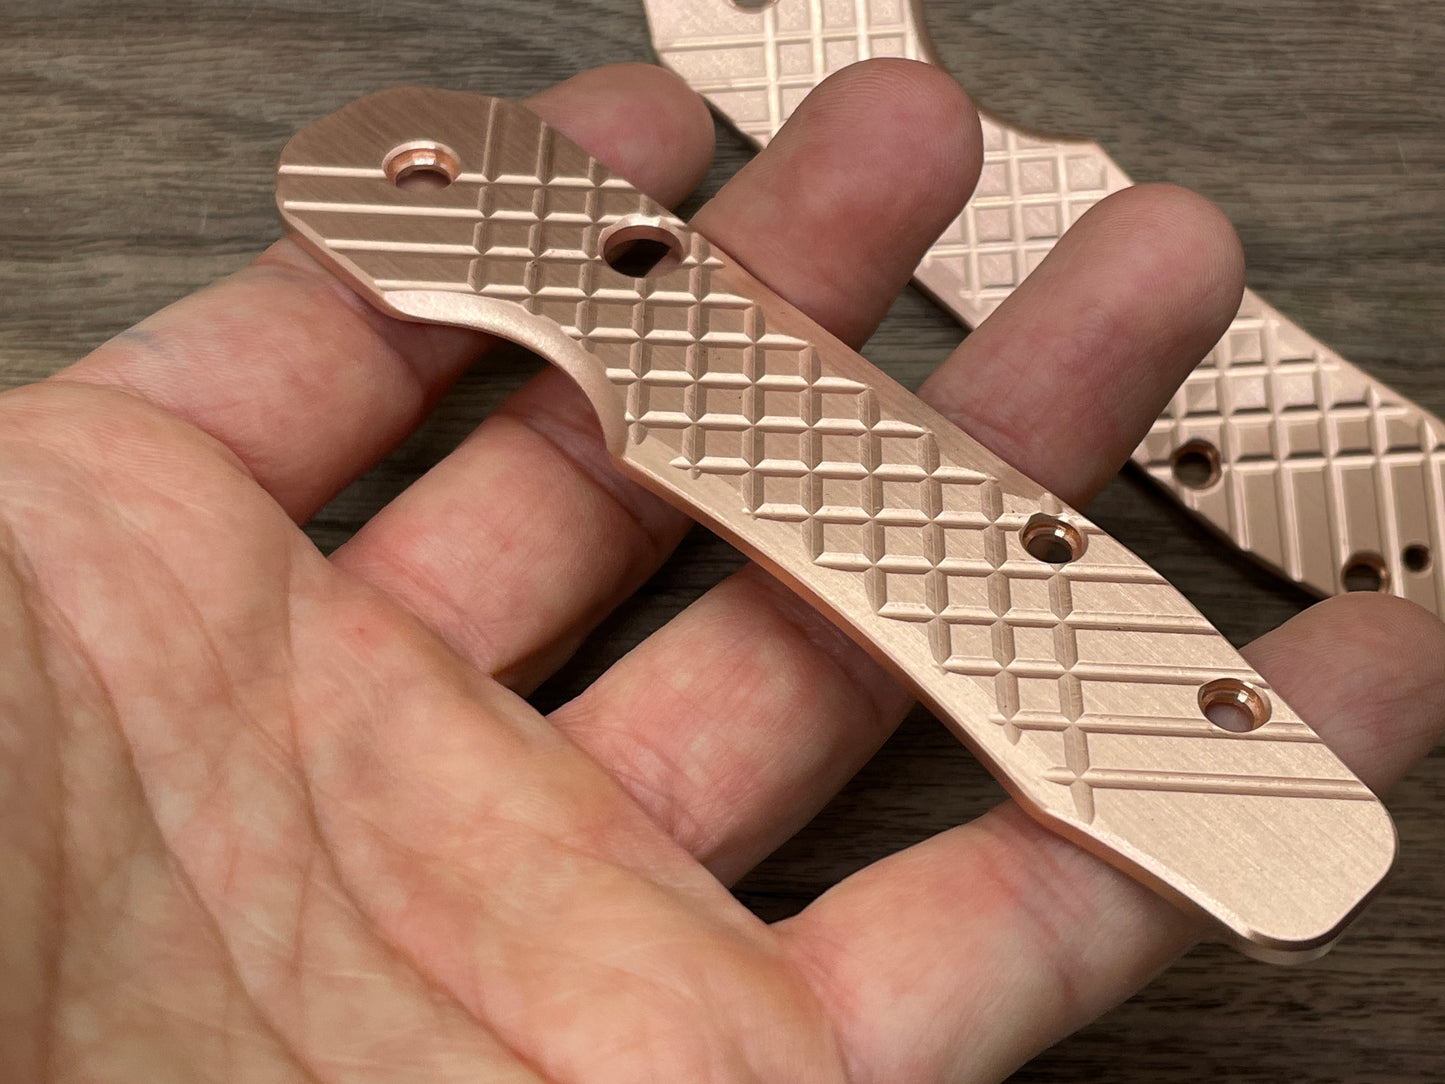 FRAG Cnc milled Copper Scales for Spyderco SMOCK